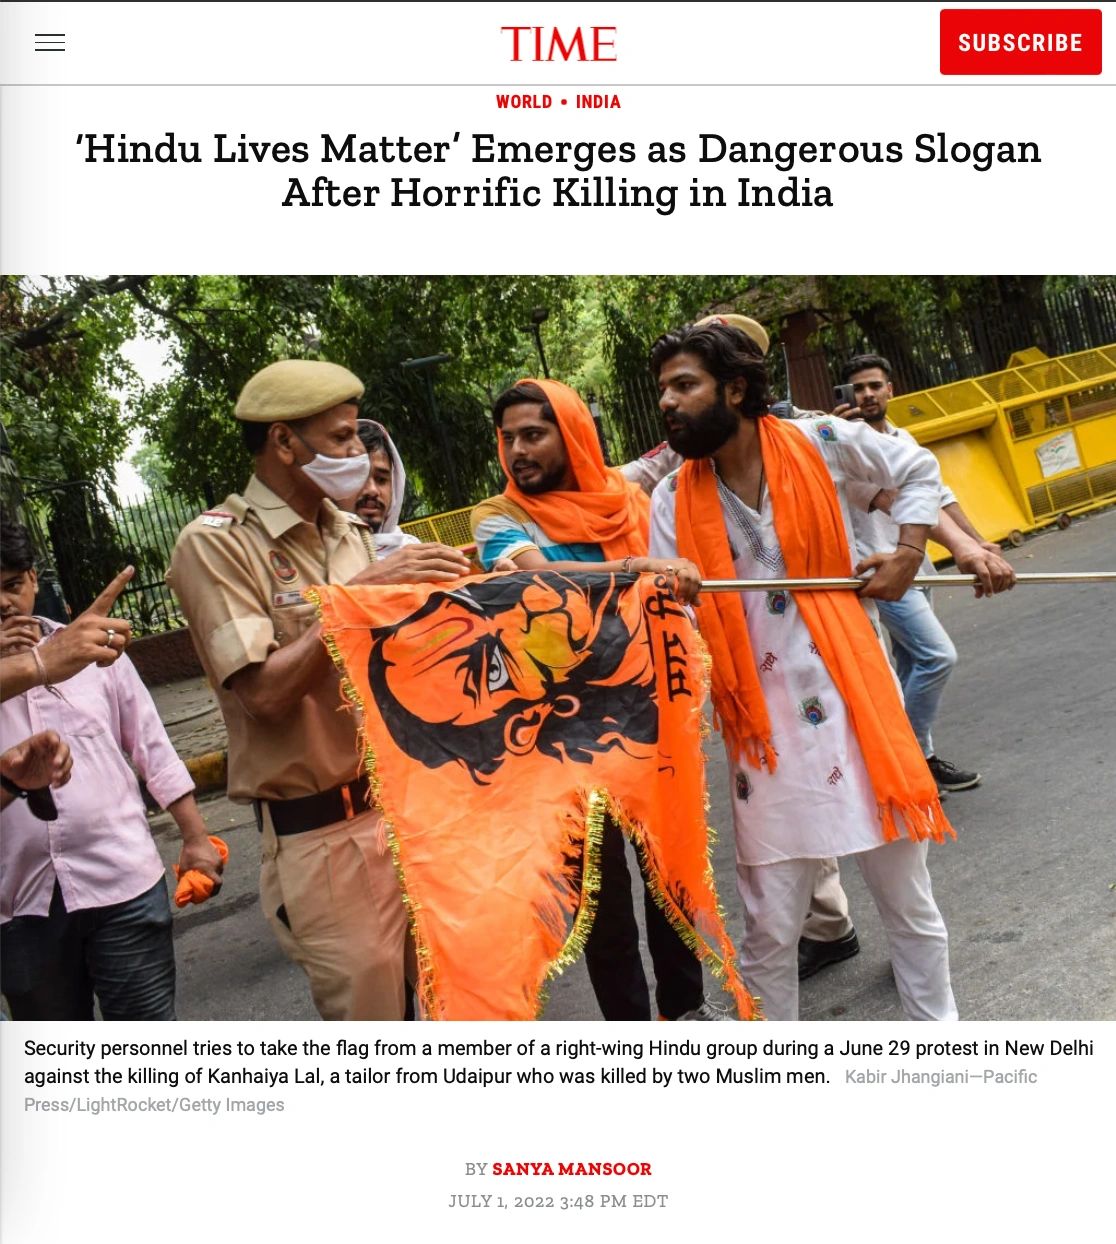 Time: 'Hindu Lives Matter" is a dangerous slogan - after beheading of Hindus by Muslims